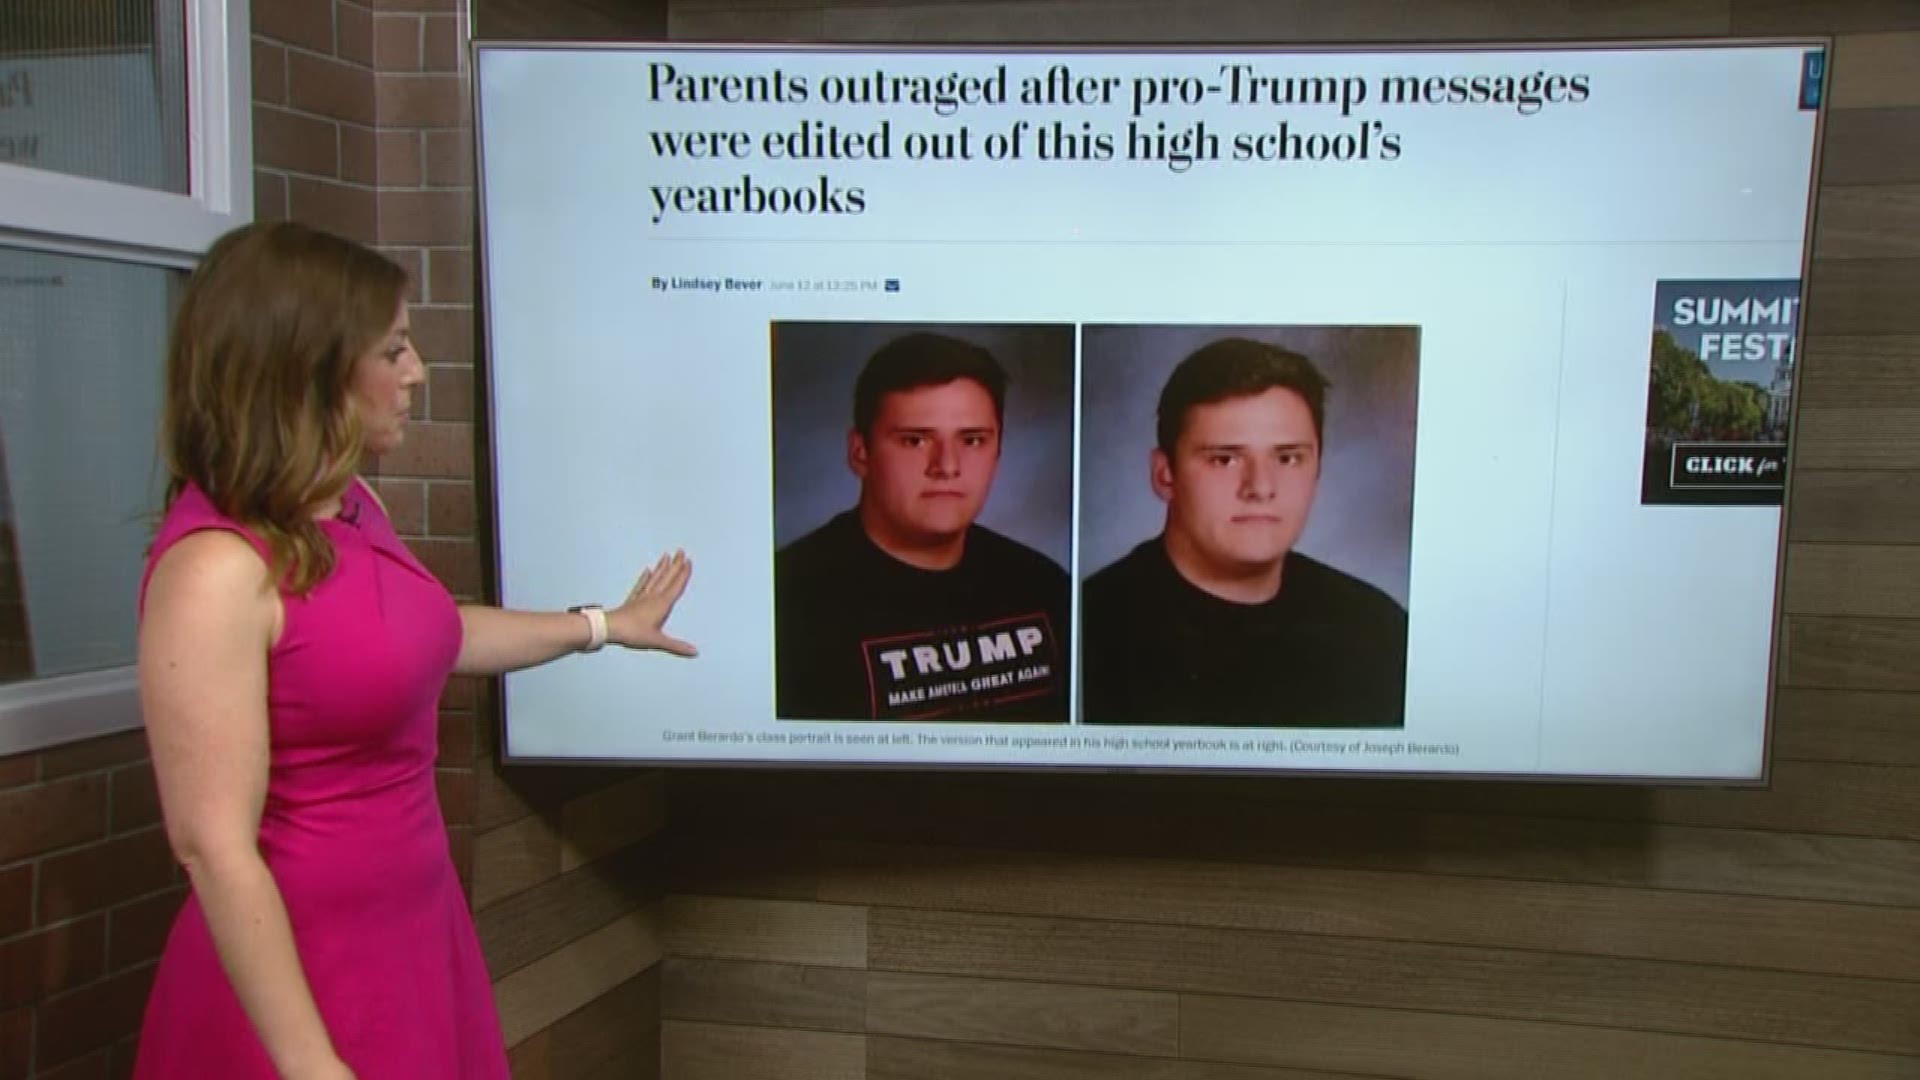 Two students in New Jersey allegedly had their Trump logo shirts and even quotes altered before appearing their high school yearbook (June 13, 2017)